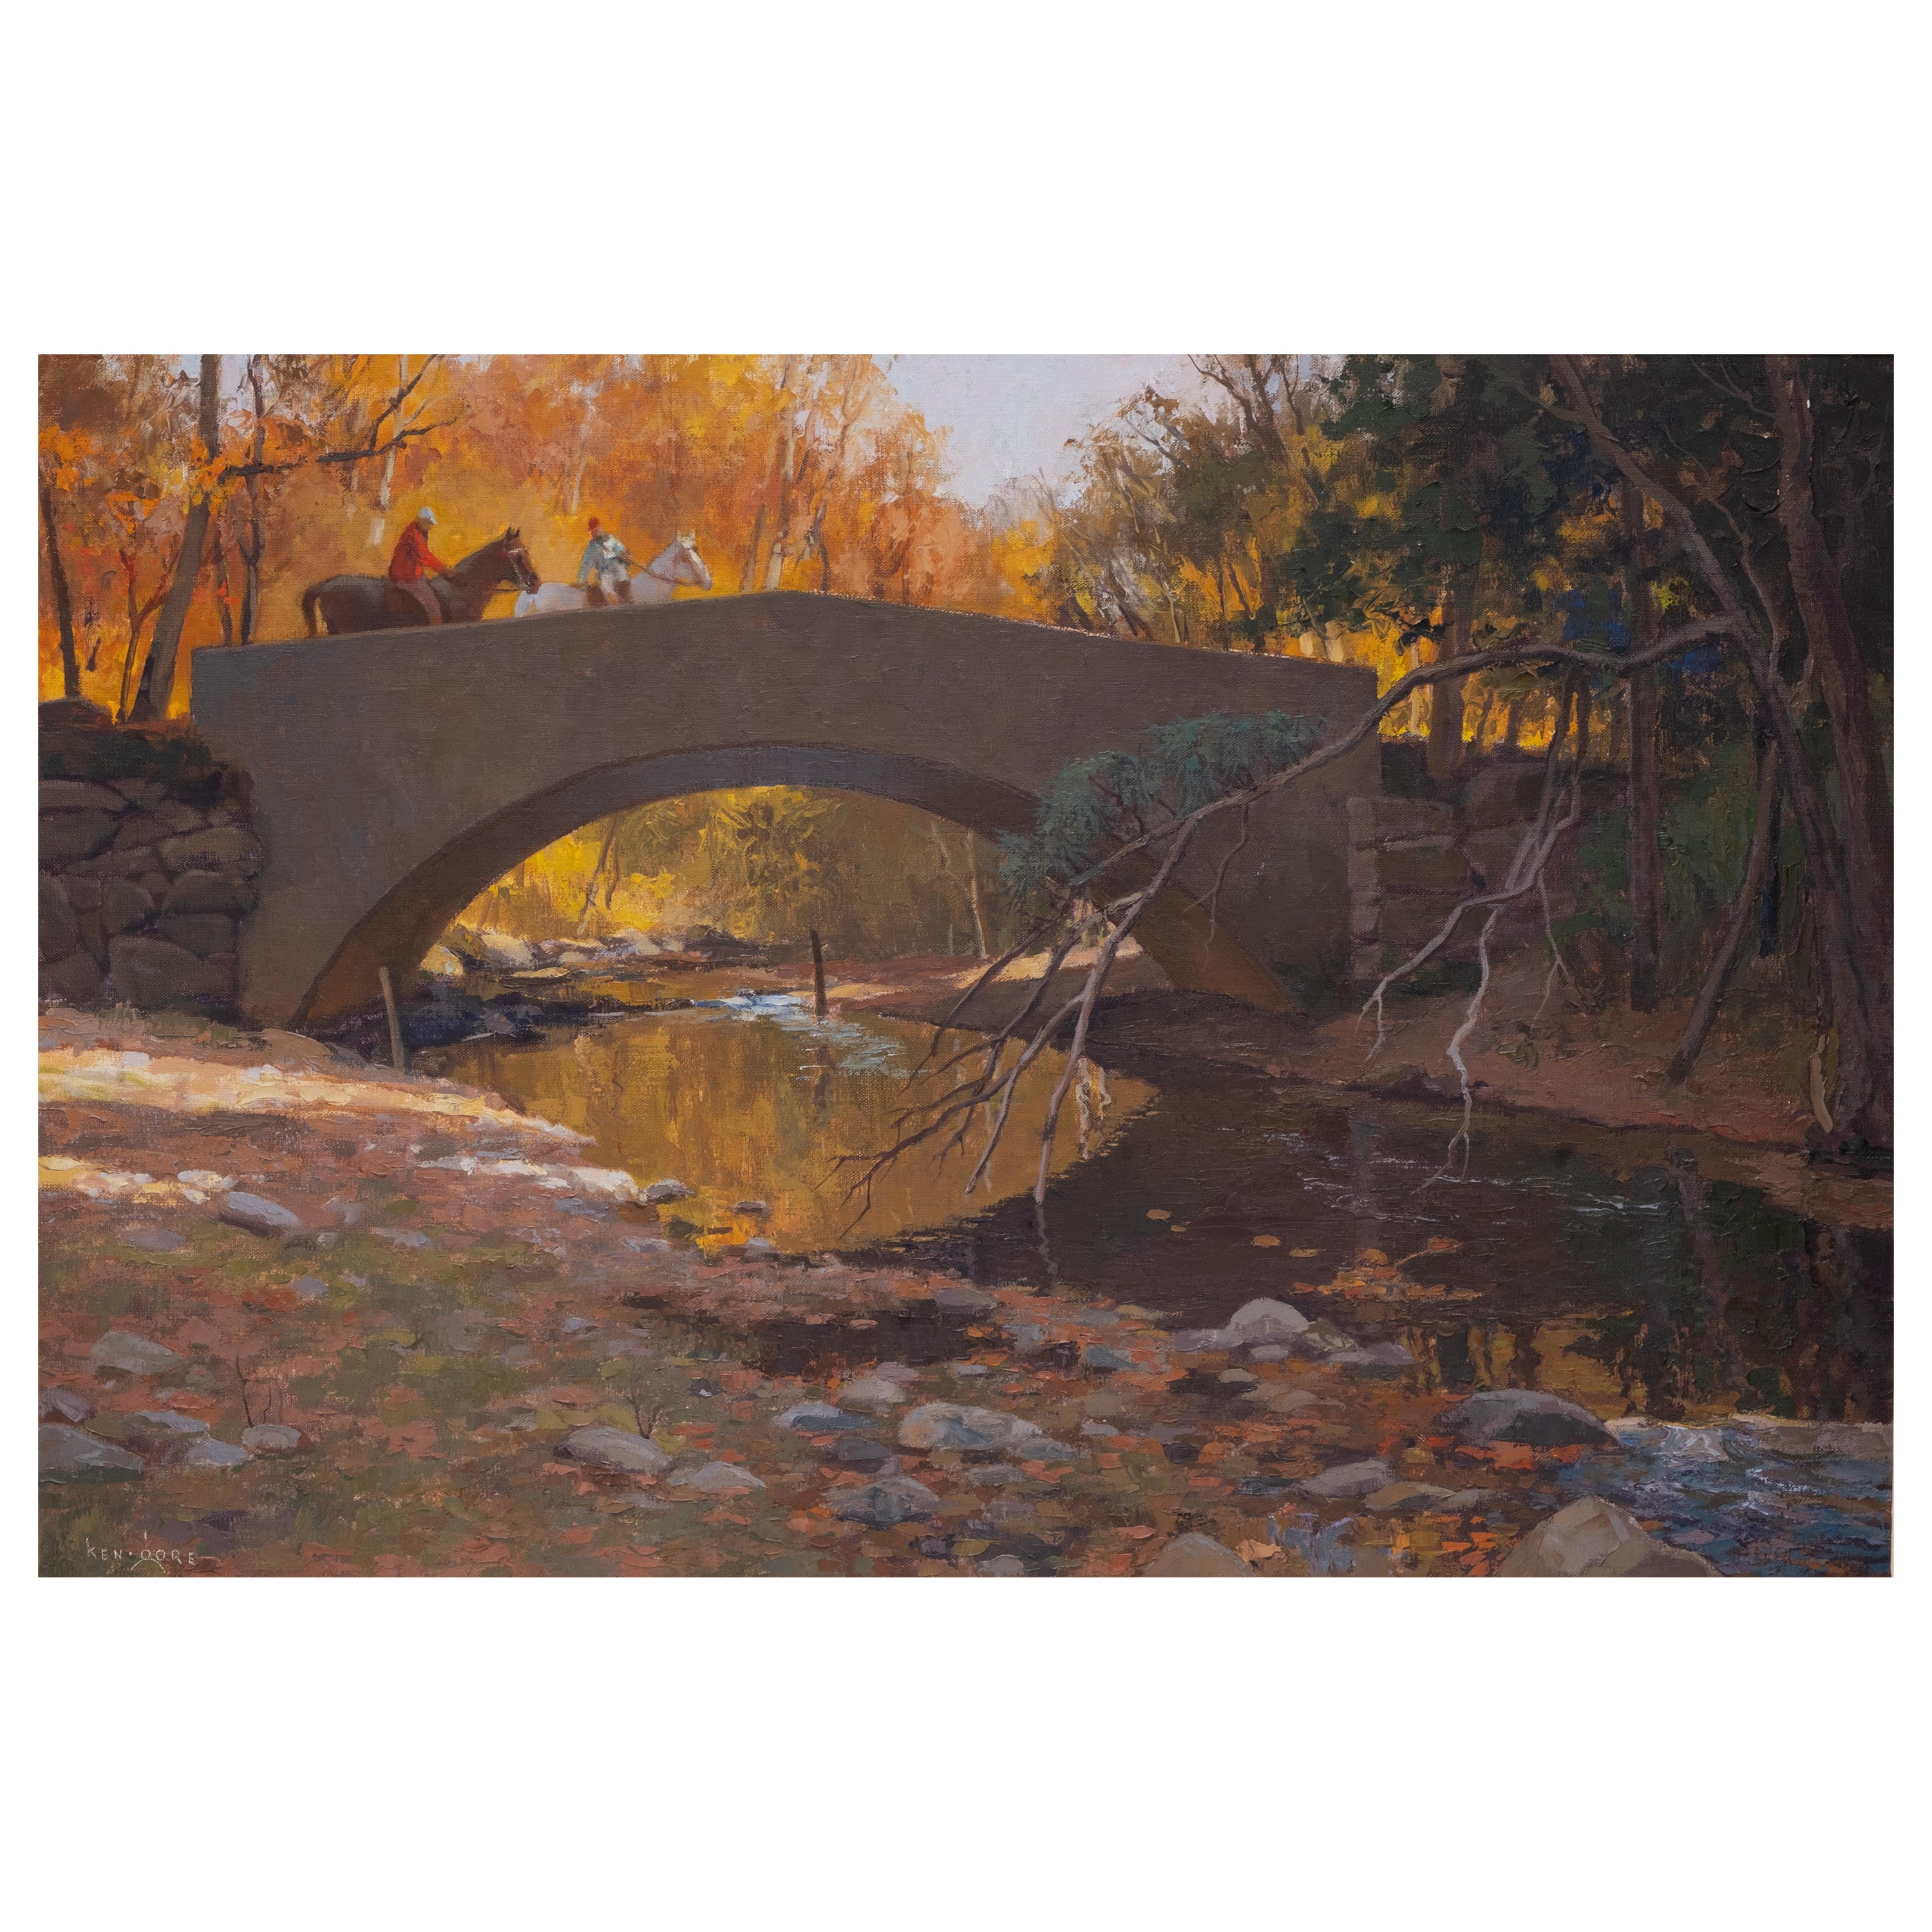 Signed Ken Gore Oil on Canvas Painting, "Riders on the Bridge" For Sale